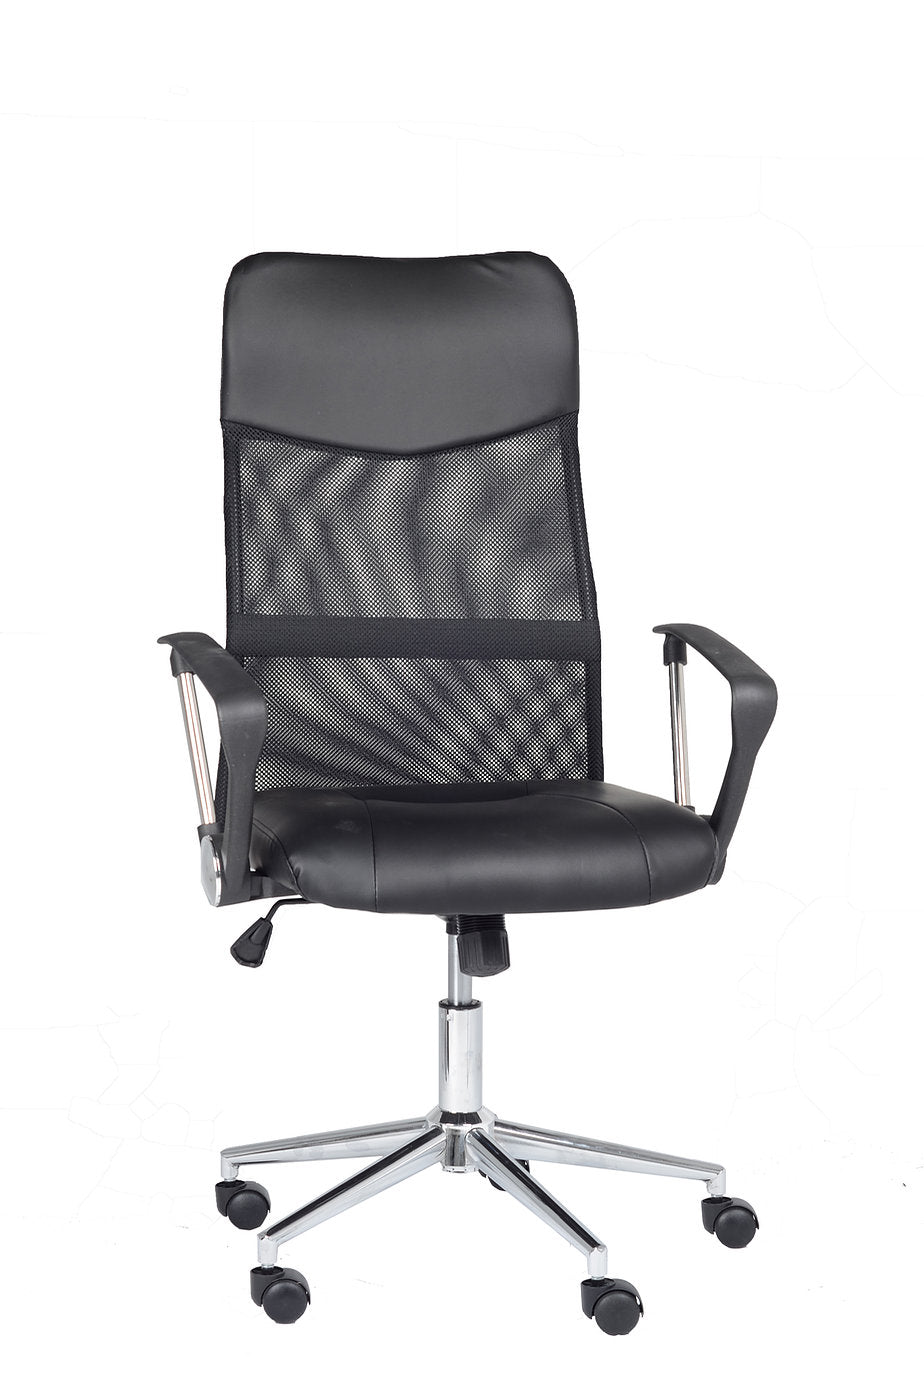 Black Office Chair - IF-7400